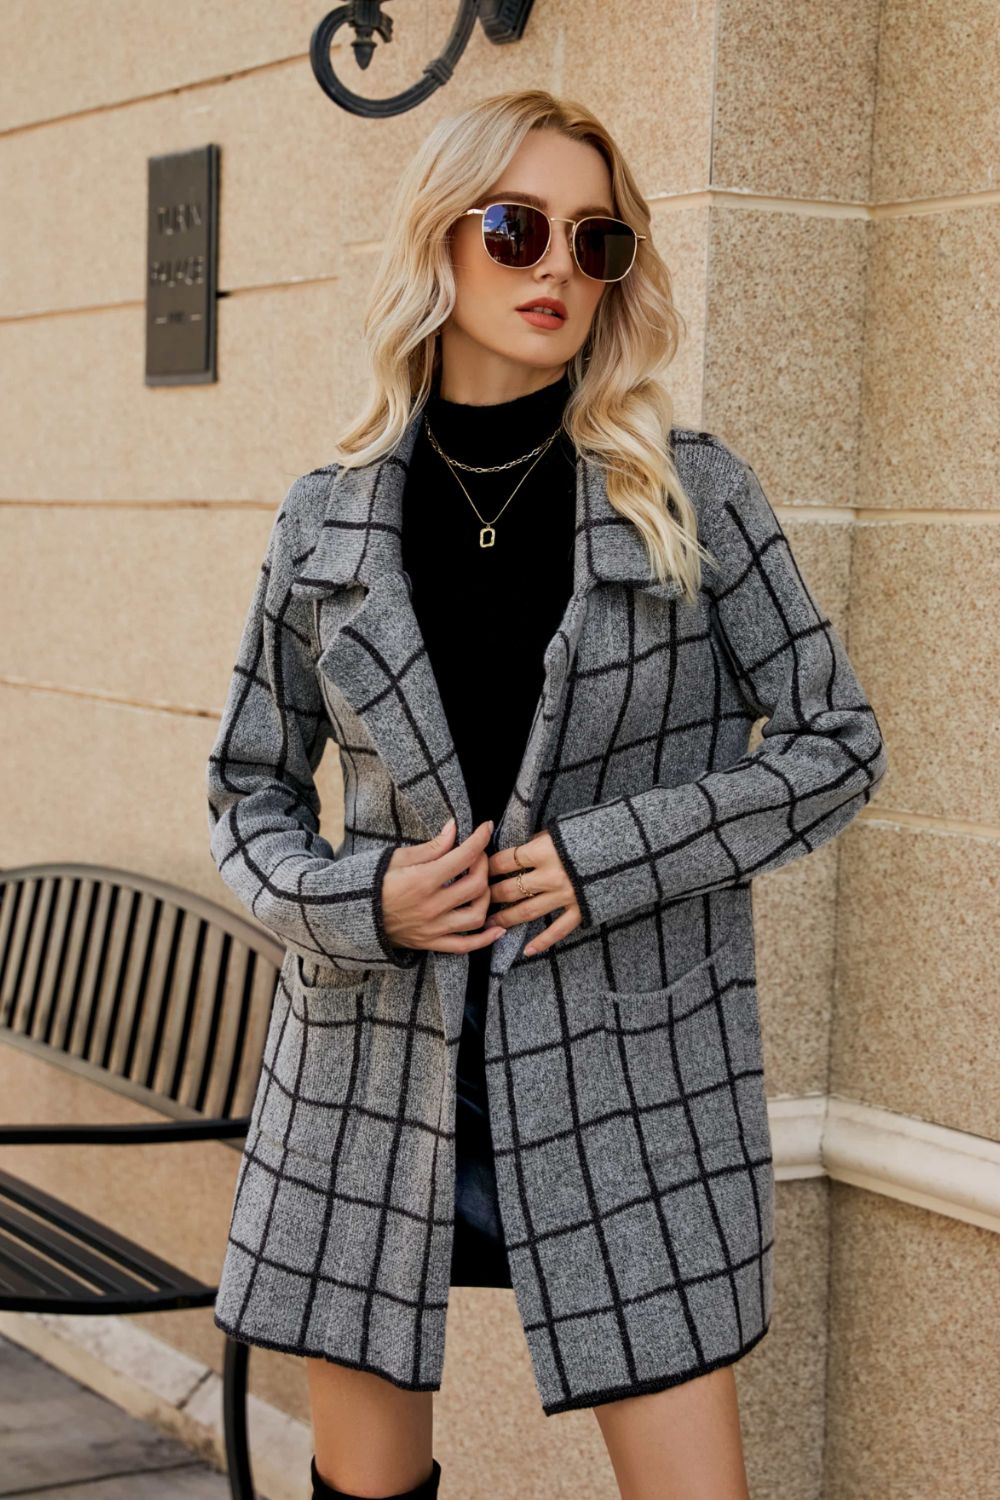 Double Take Printed Open Front Lapel Collar Cardigan with Pockets